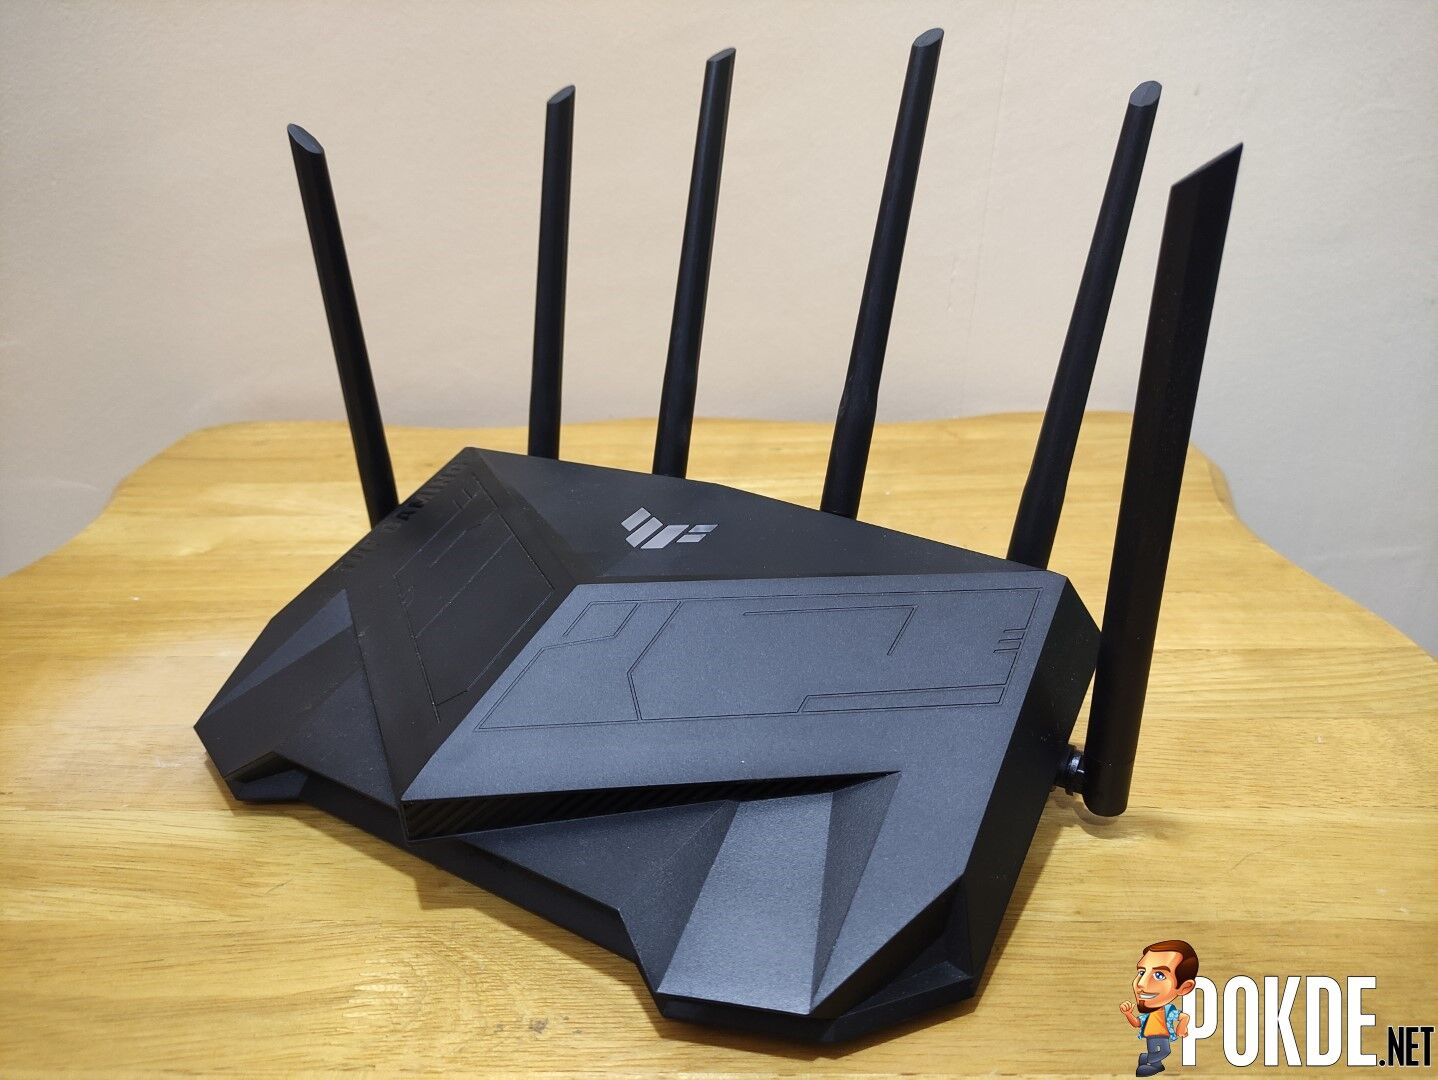 ASUS TUF Gaming AX5400 Router Review - Budget Friendly Router For Your Gaming Needs 36